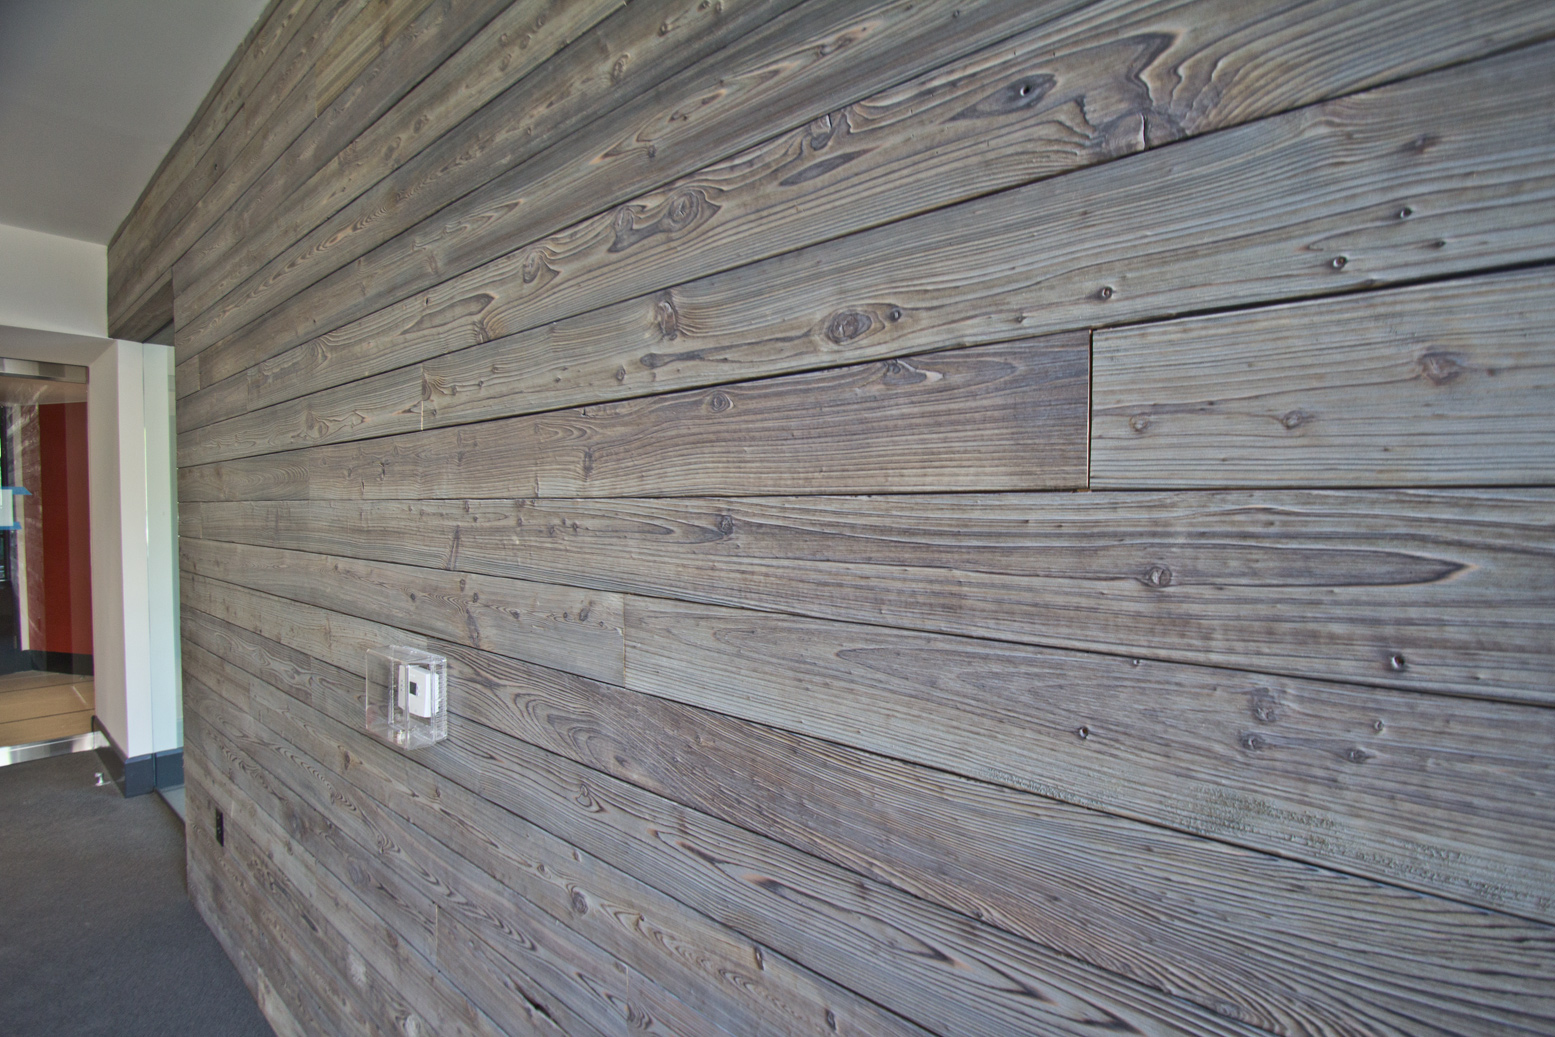 Terrapin Row :: Amenity-Filled Student Housing featuring Shou Sugi Ban Wood by reSAWN